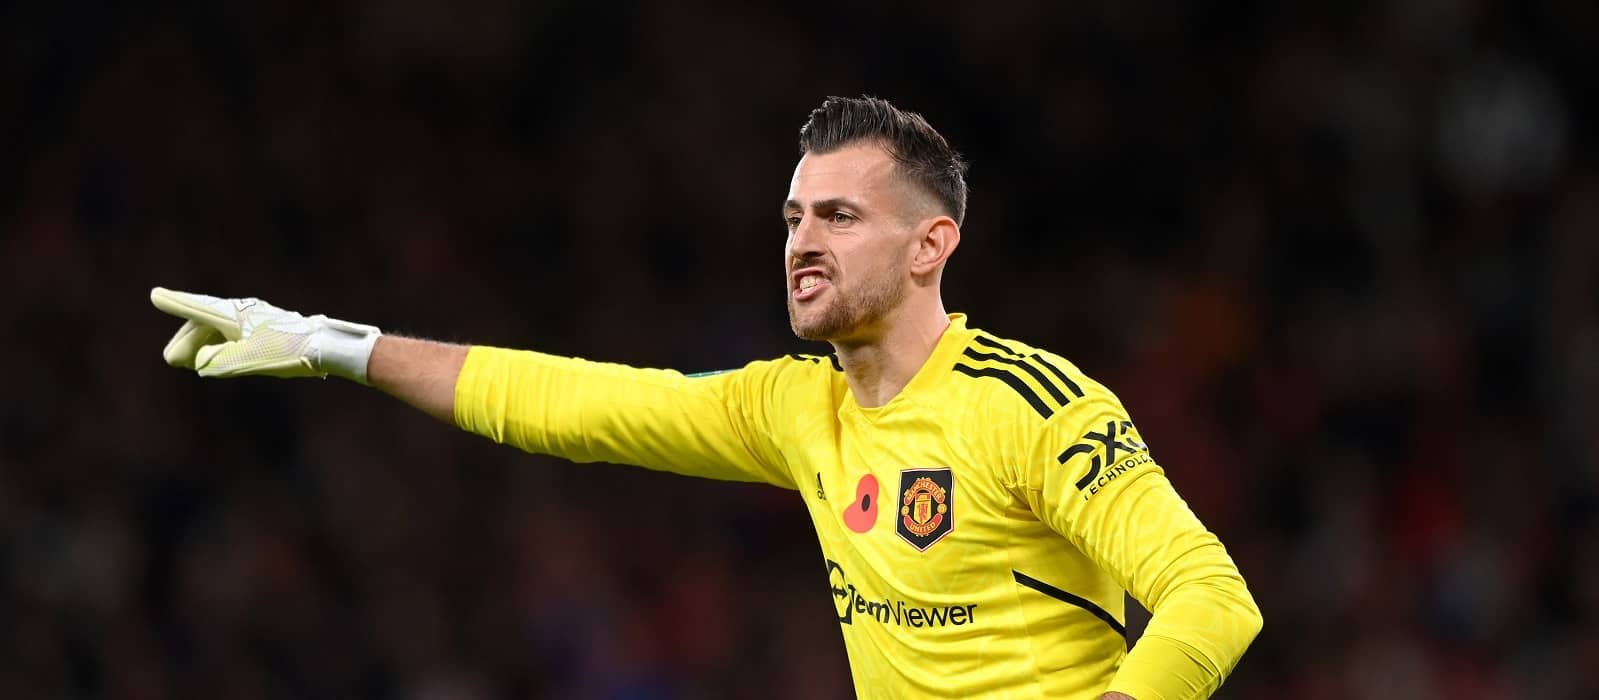 Goalkeeper Martin Dubravka recalls strange feat he achieved after joining Manchester United on loan – Man United News And Transfer News